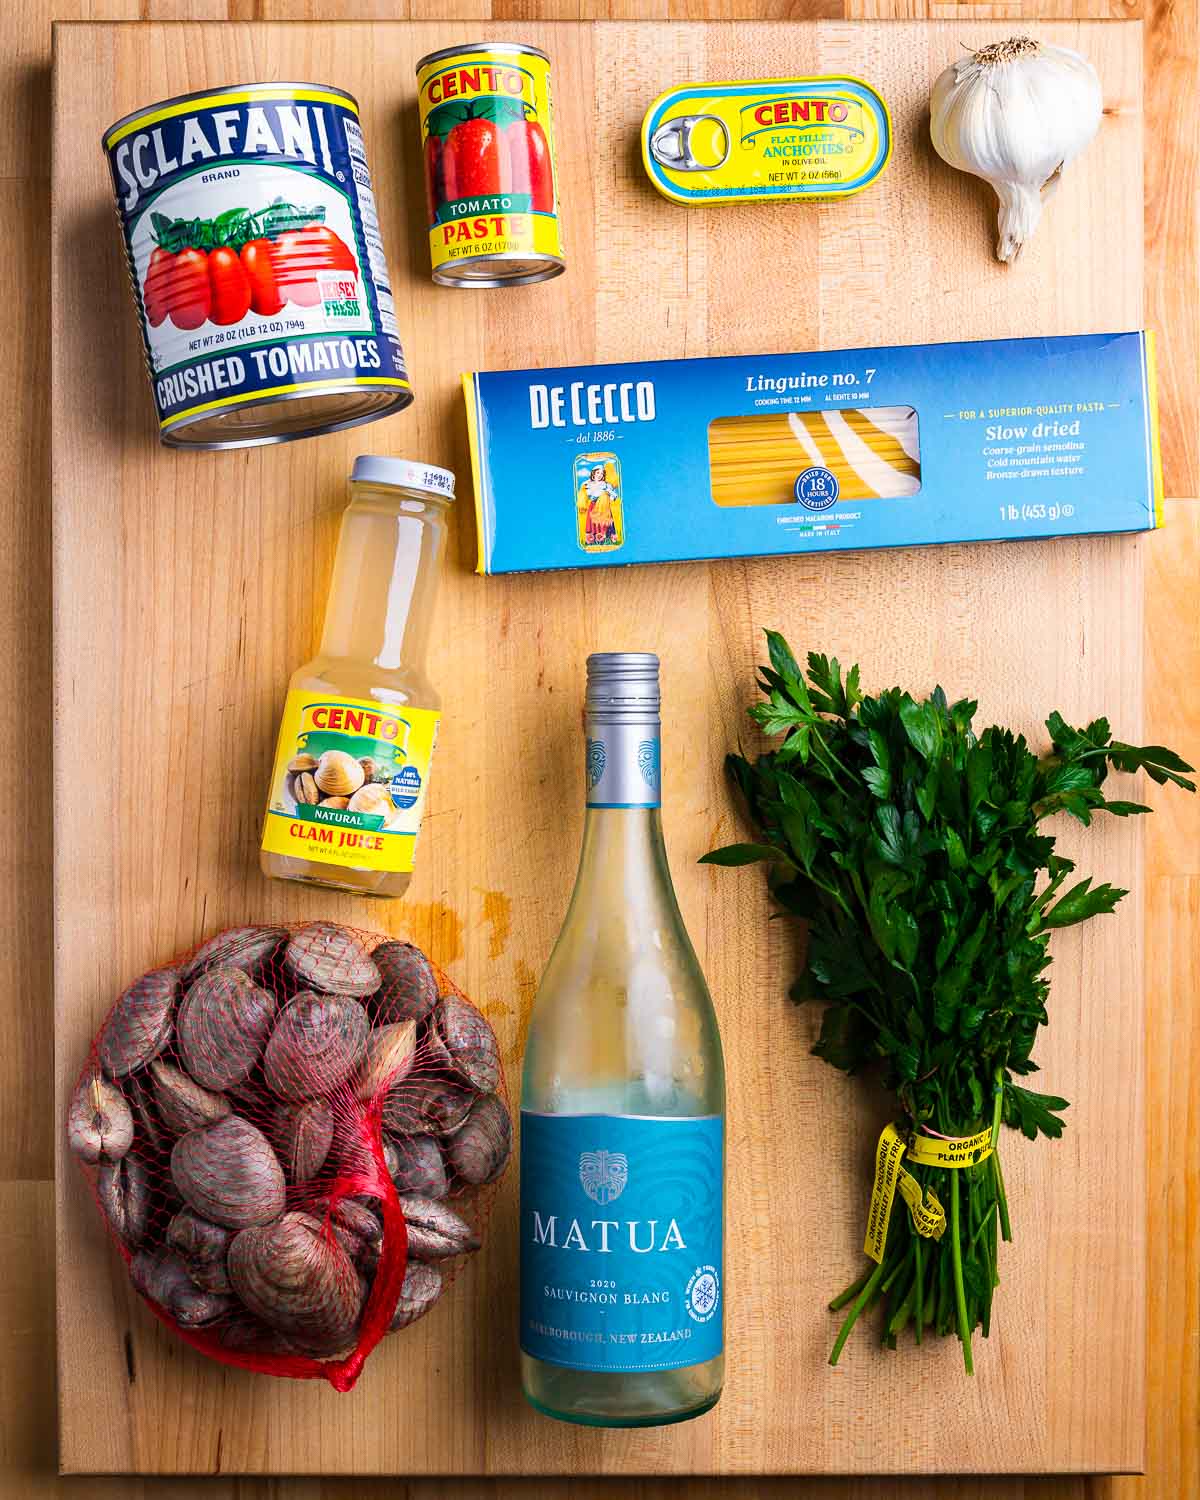 Ingredients shown: plum tomatoes, tomato paste, anchovies, garlic, linguine, clam juice, clams, wine, and parsley.